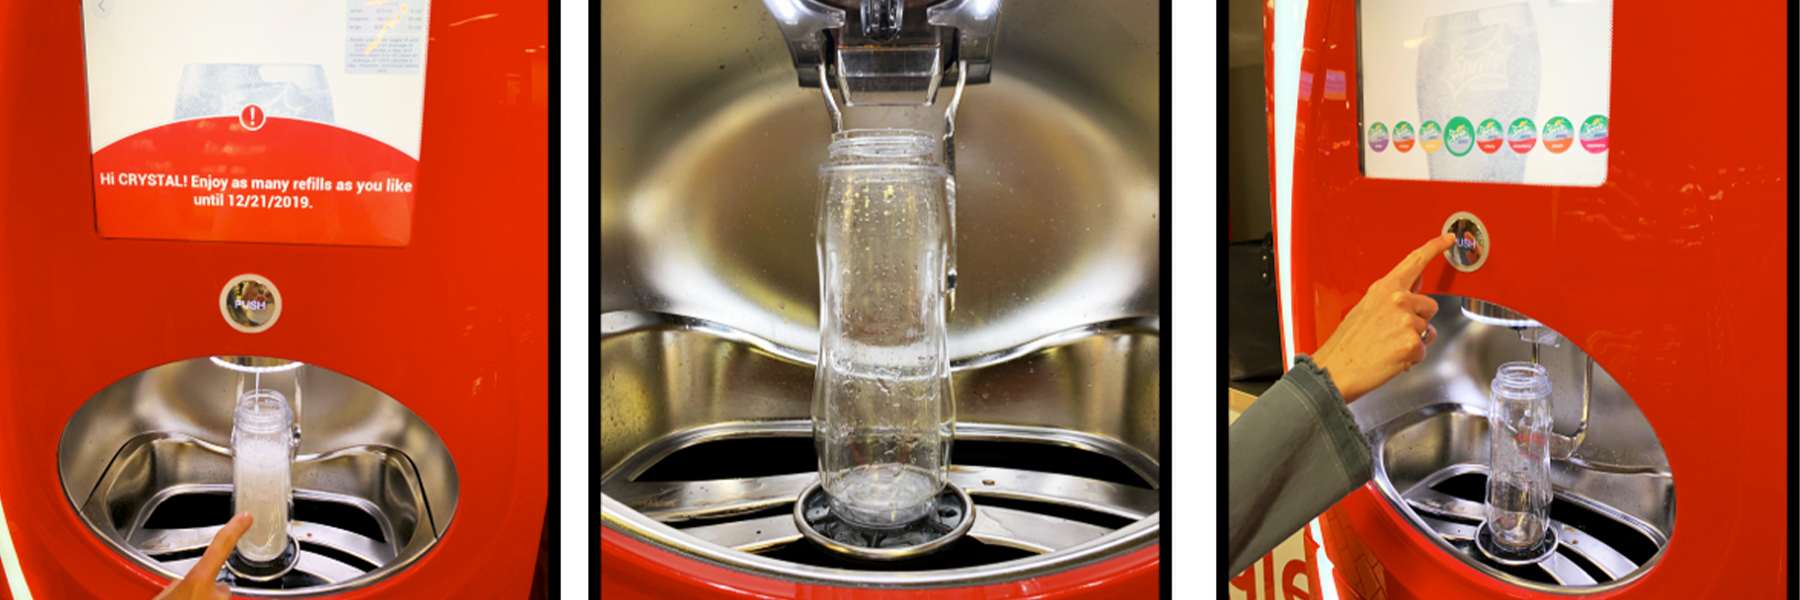 Photo collage of a fountain drink machine pouring soda in a reusable bottle